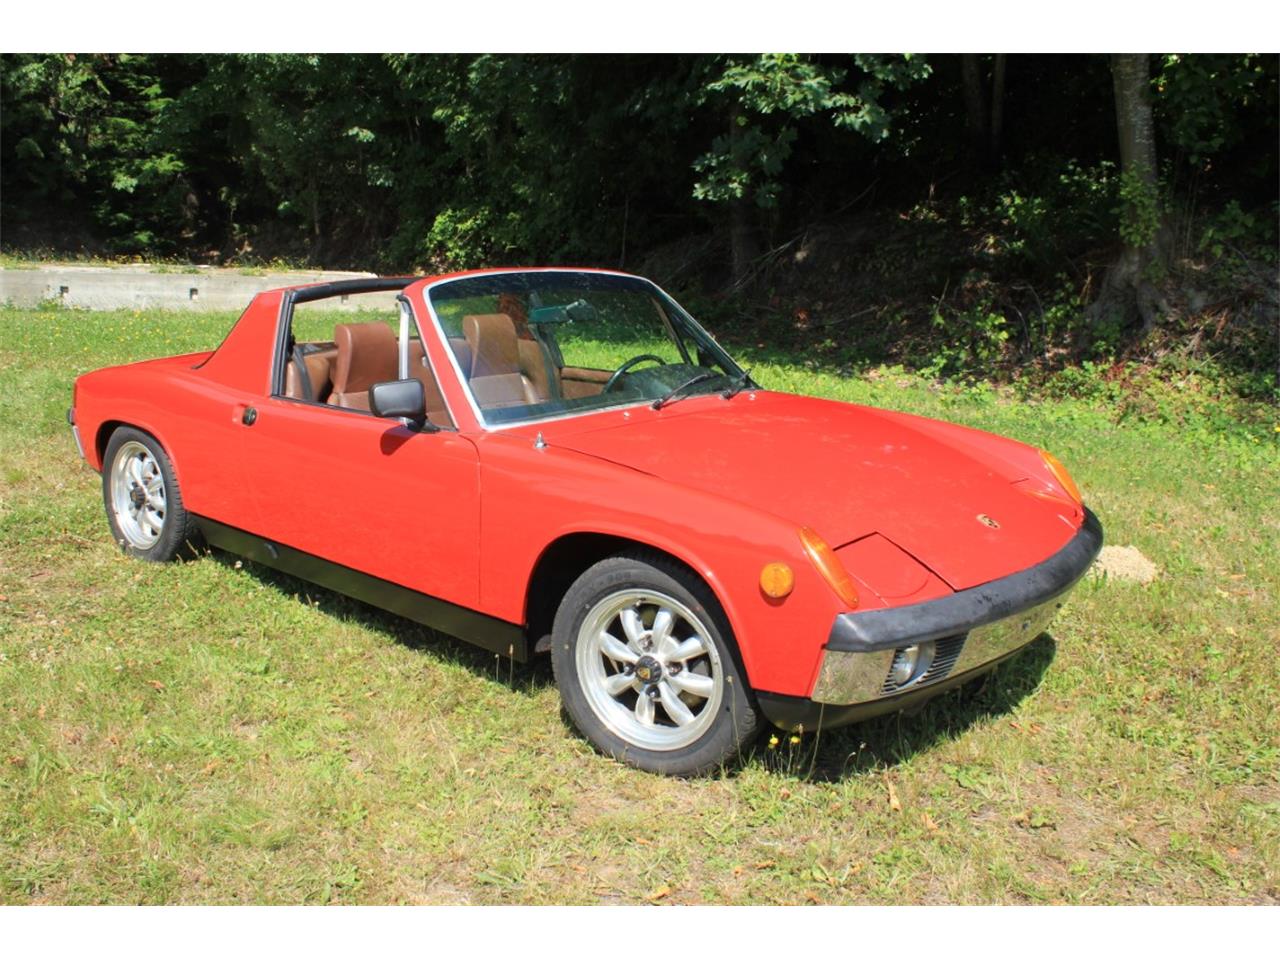 For Sale at Auction: 1973 Porsche 914 for sale in Tacoma, WA